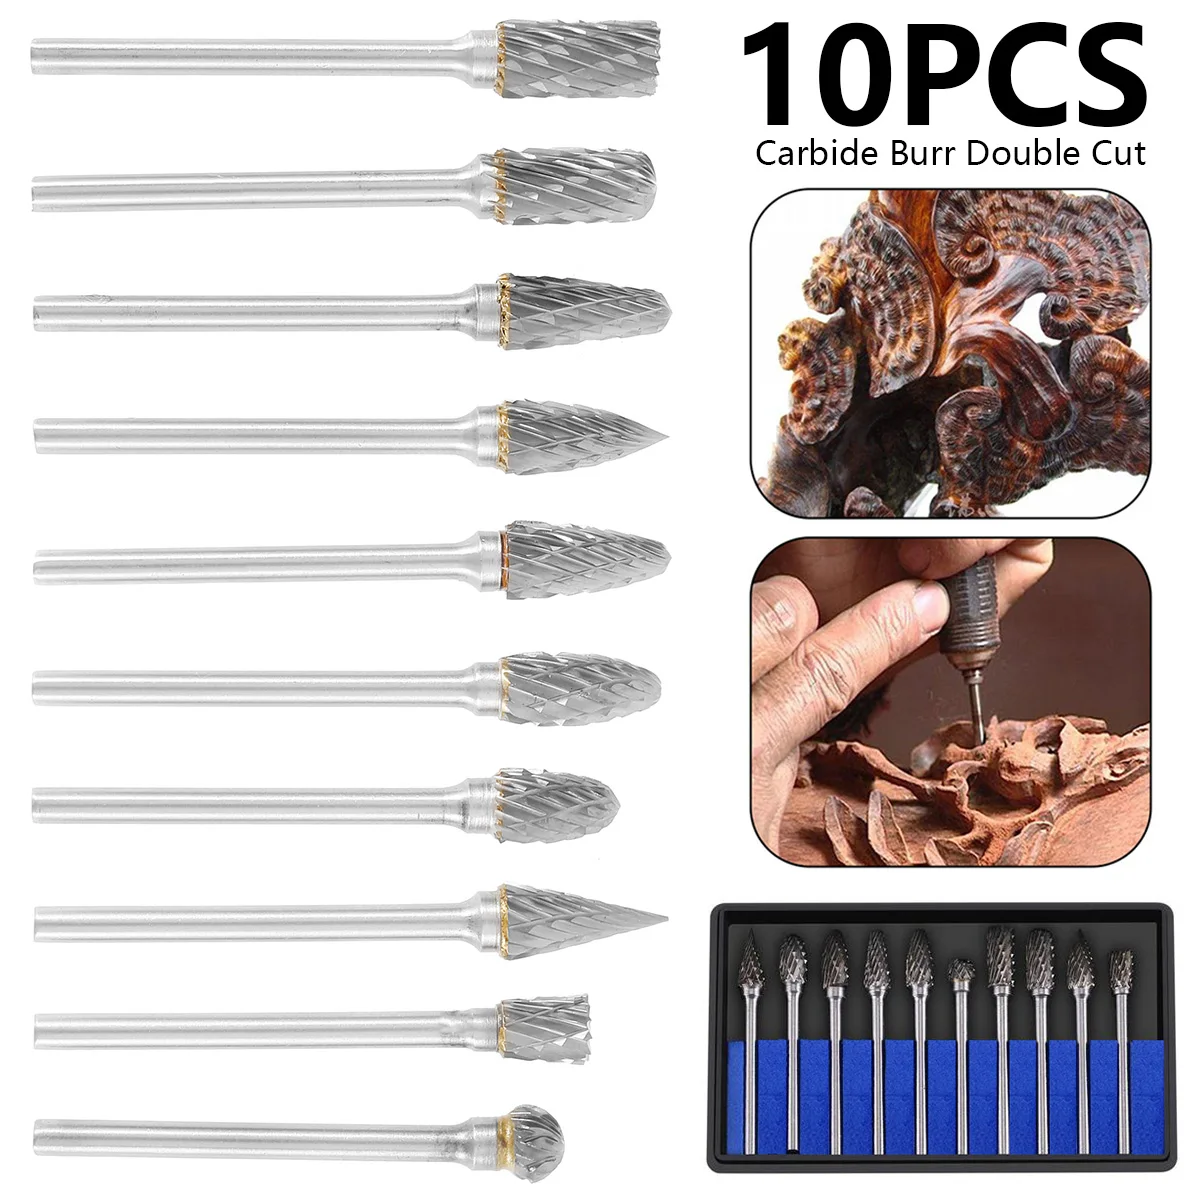 

10Pcs Rotary Files Burrs Set Carbide Cutting Burrs Bits Set with 3mm Shank Rotary Burrs Tool Fits Most Rotary Drill Die Grinder